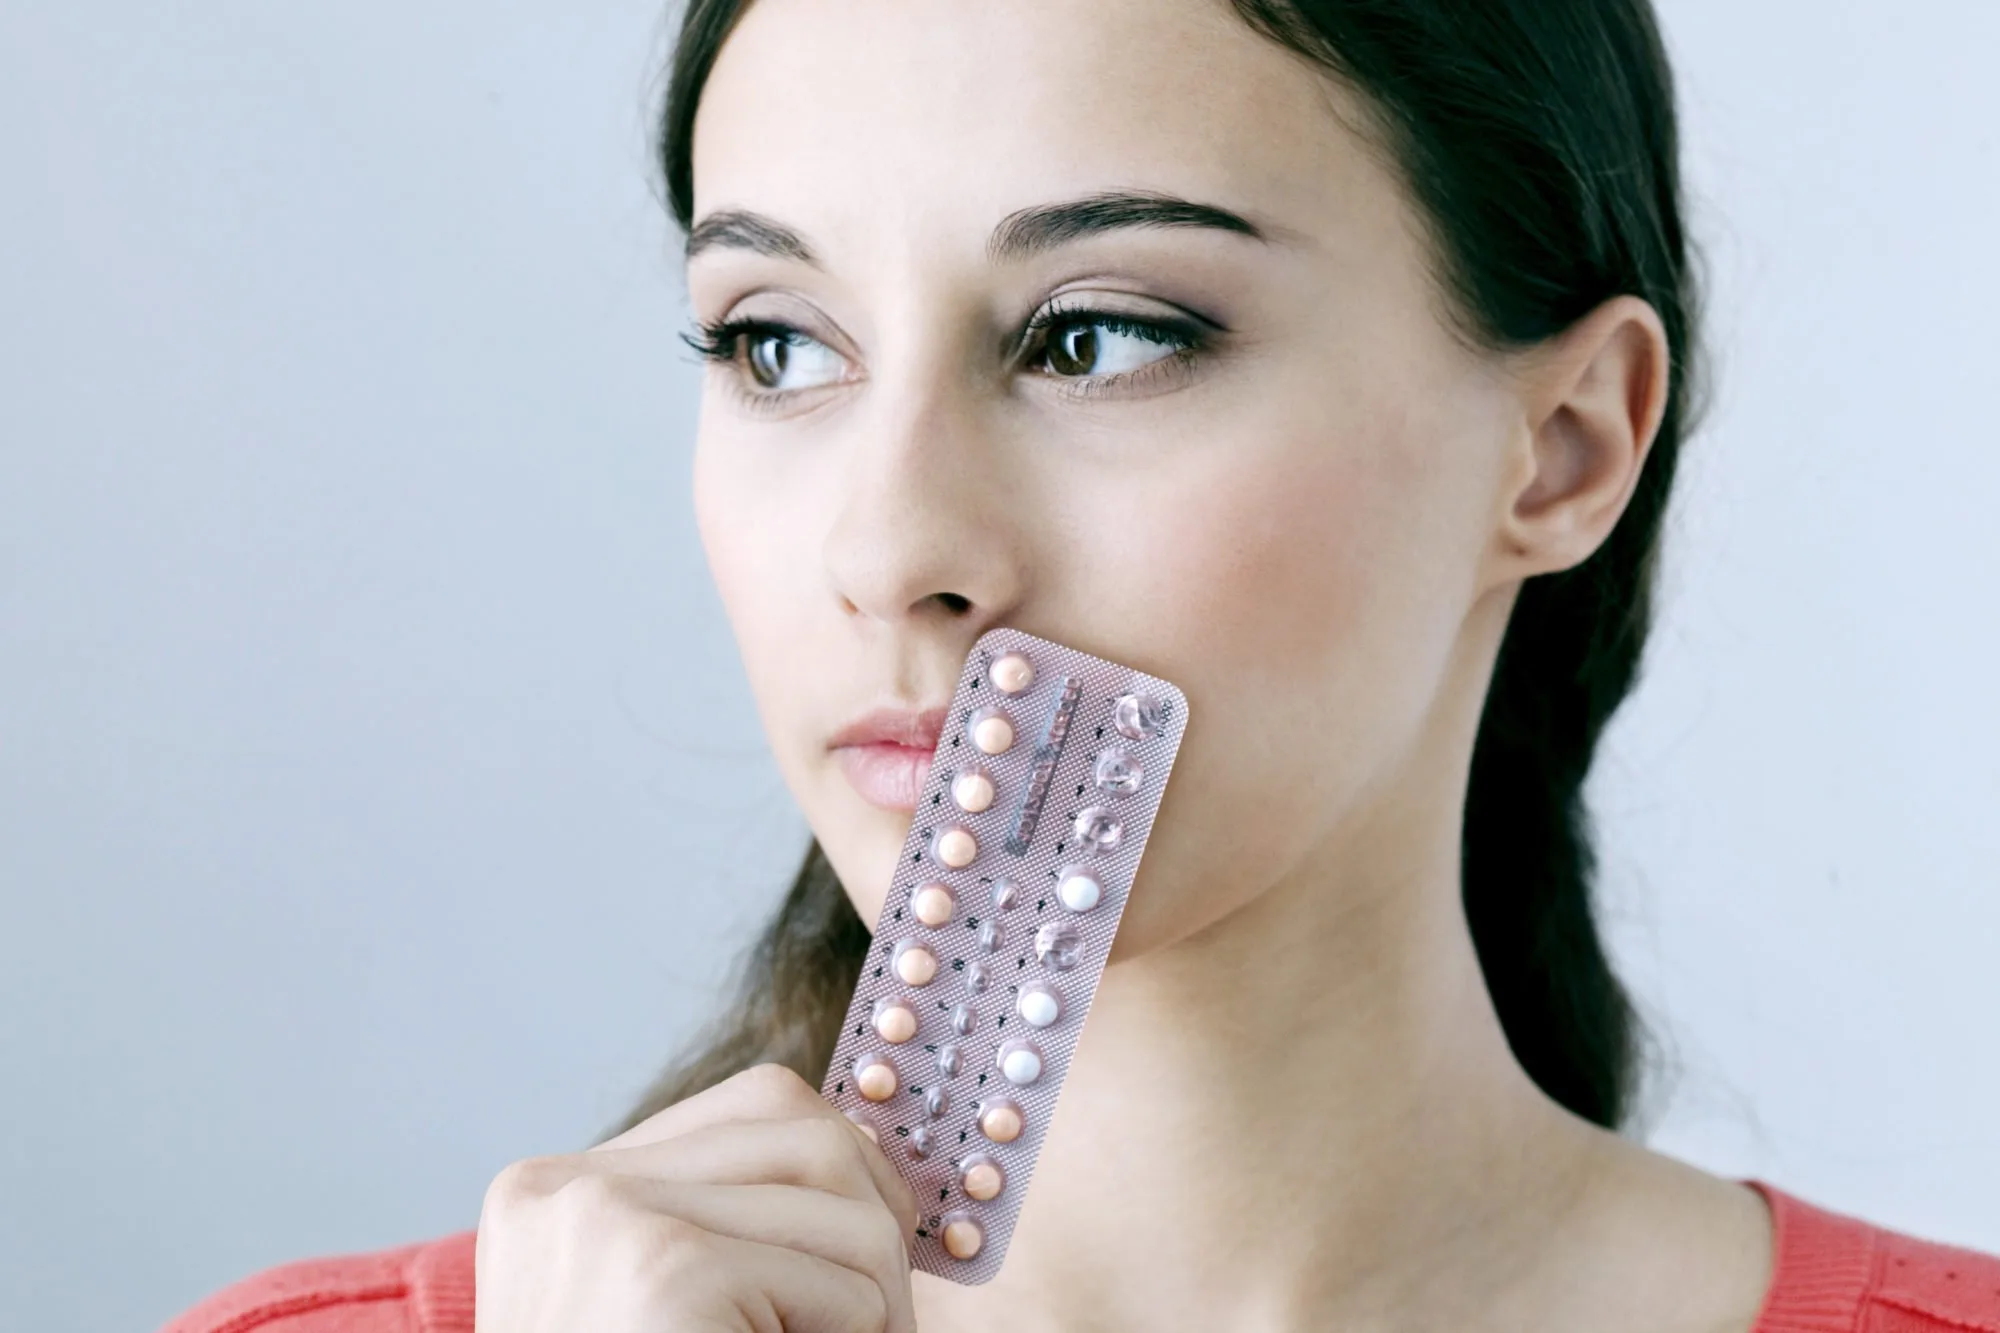 The Pill: Health Risks Of Using This Form Of Birth Control